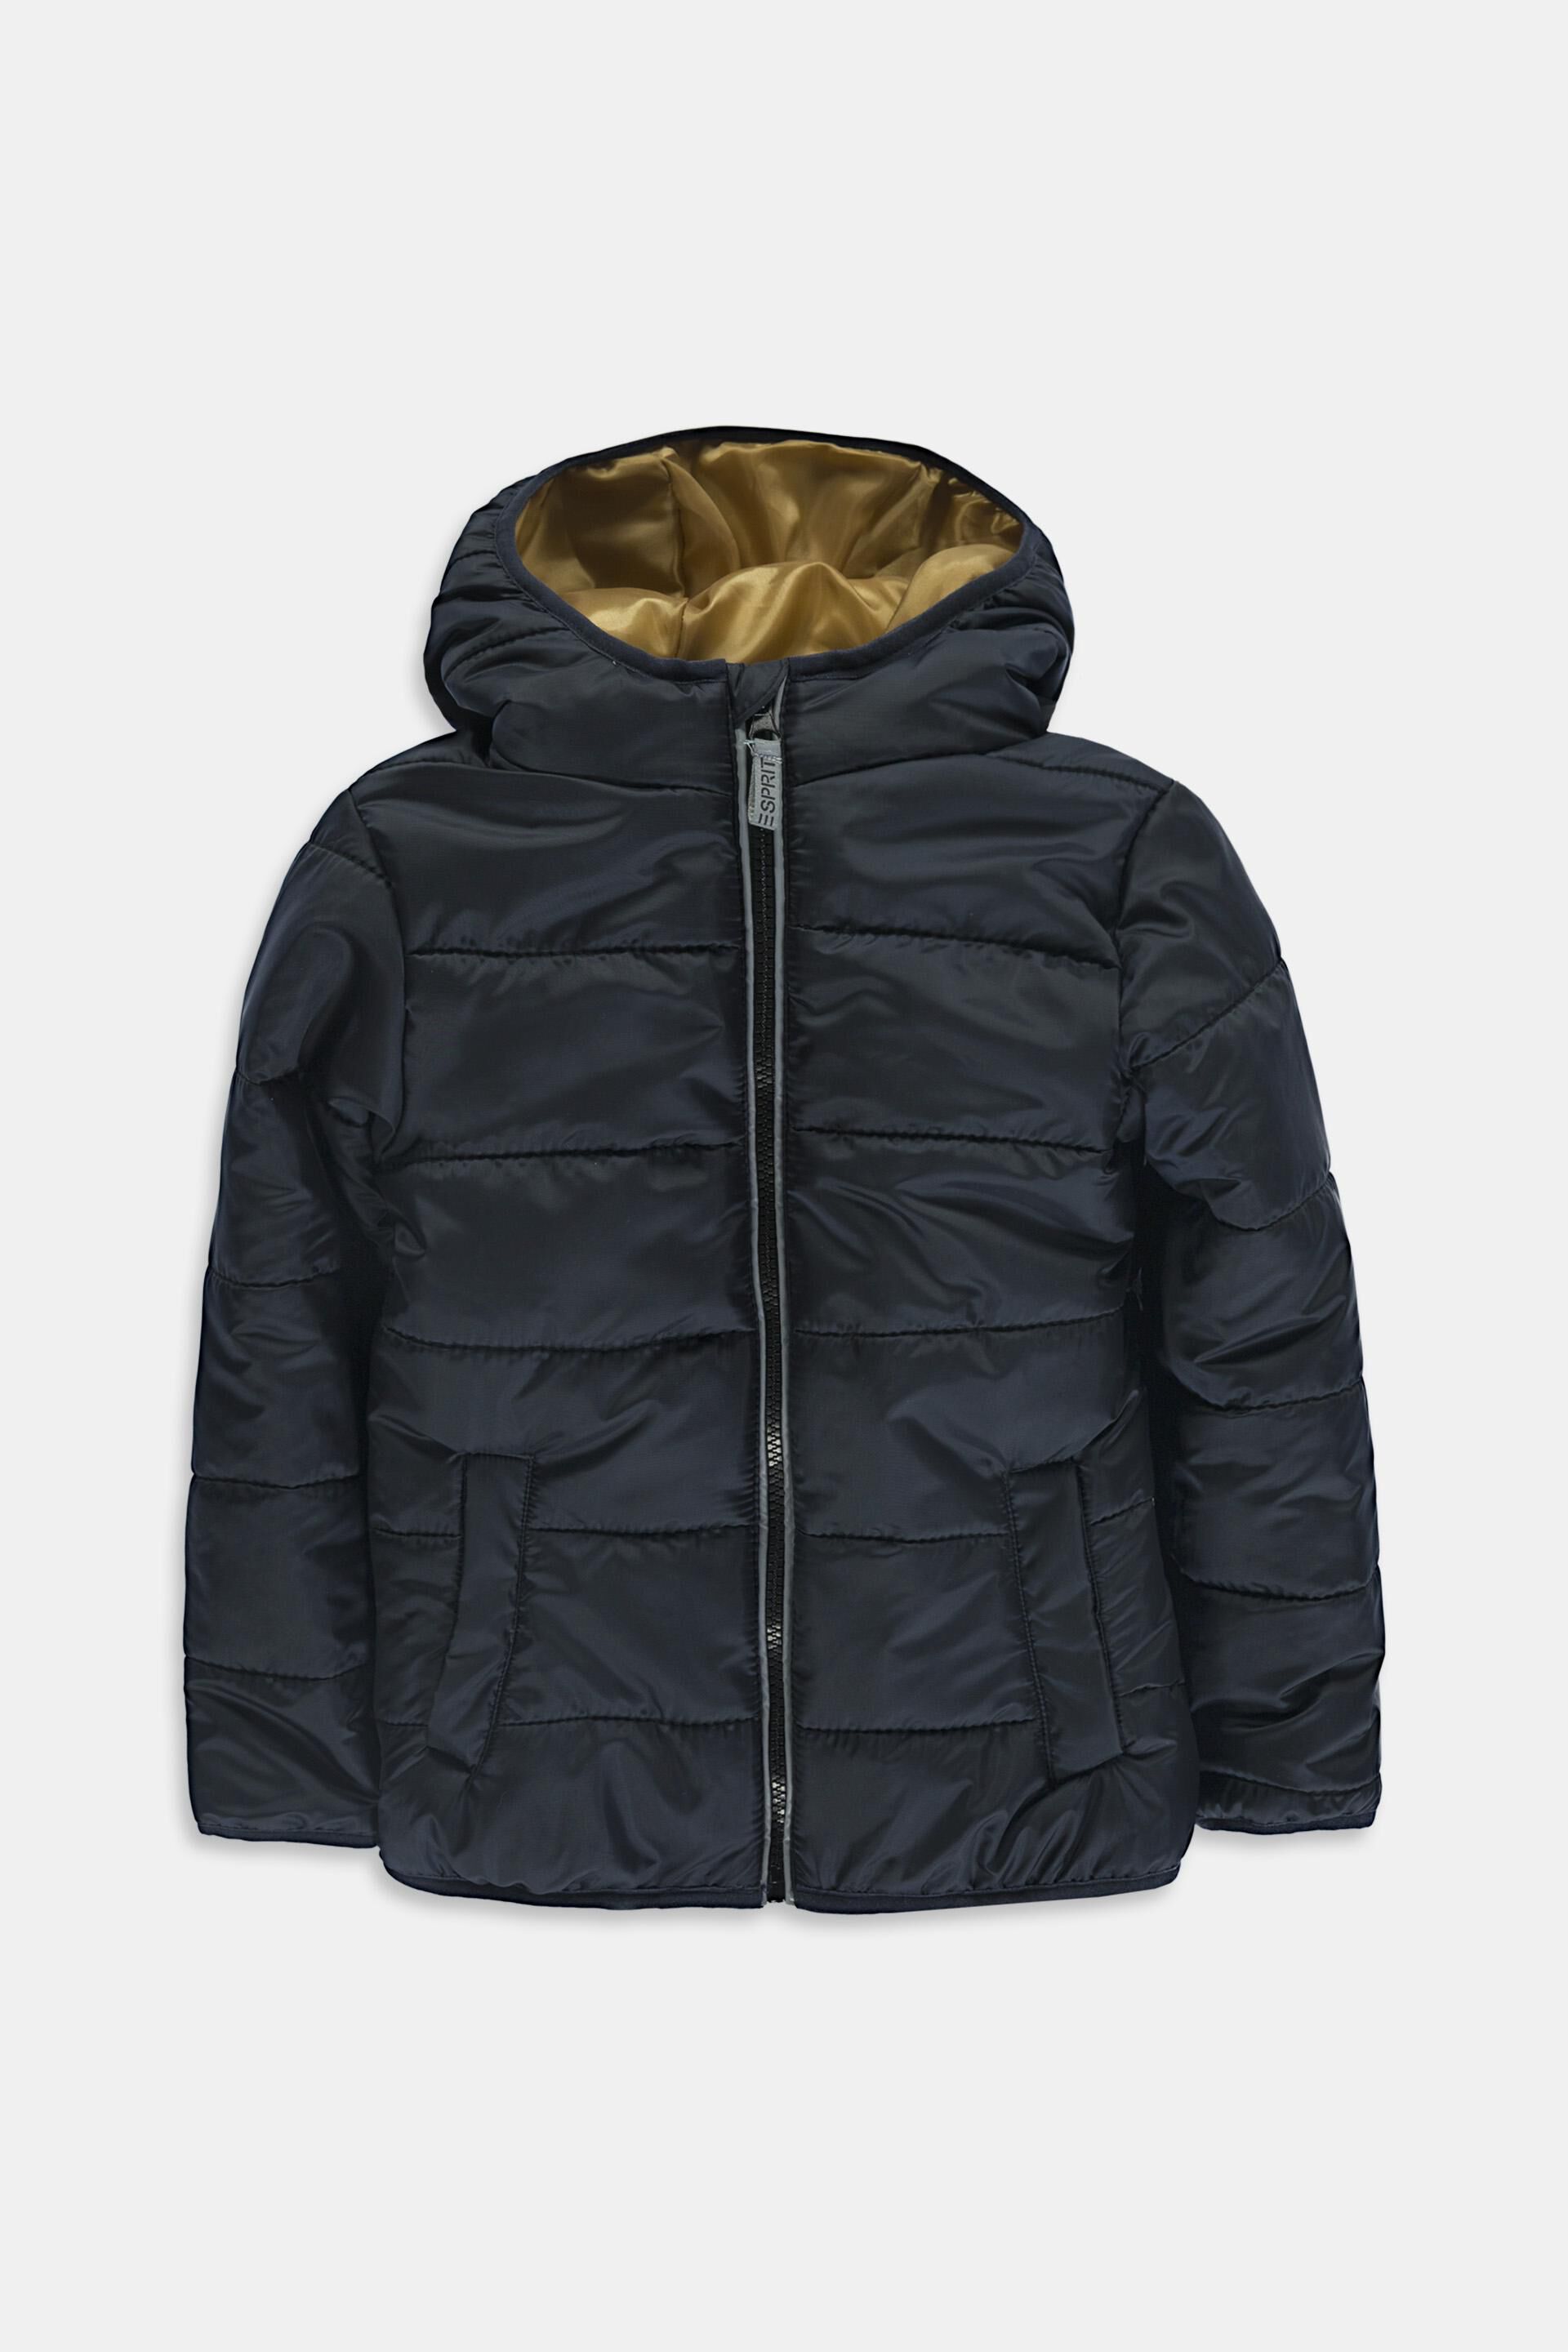 Esprit quilted jacket Padded hood a with